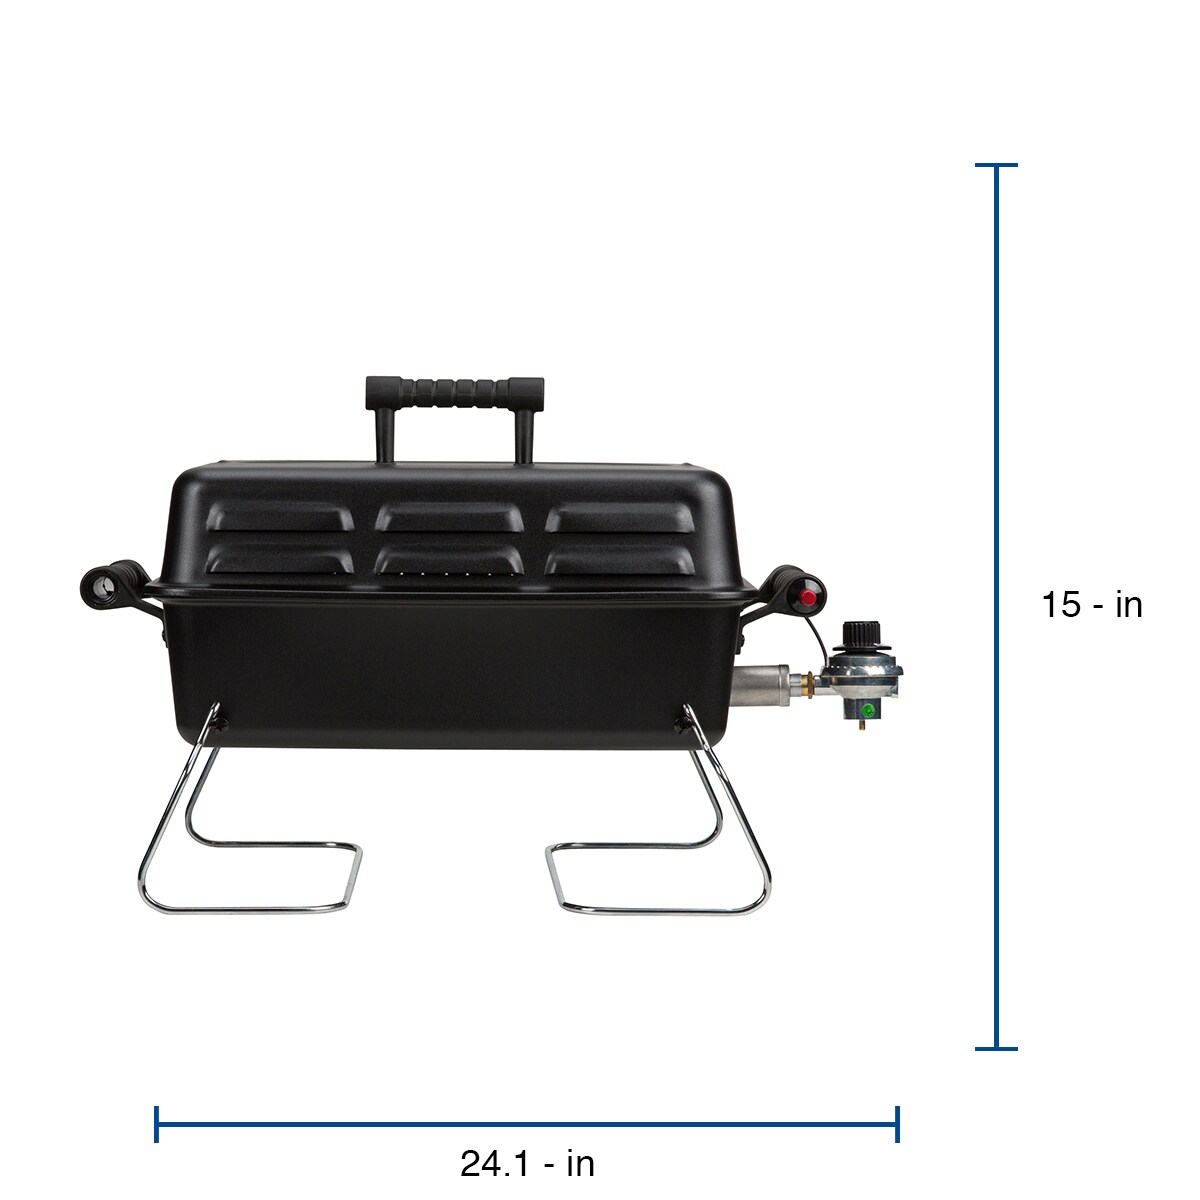 190-Sq in Black Portable Gas Grill in Portable Grills department at Lowes.com